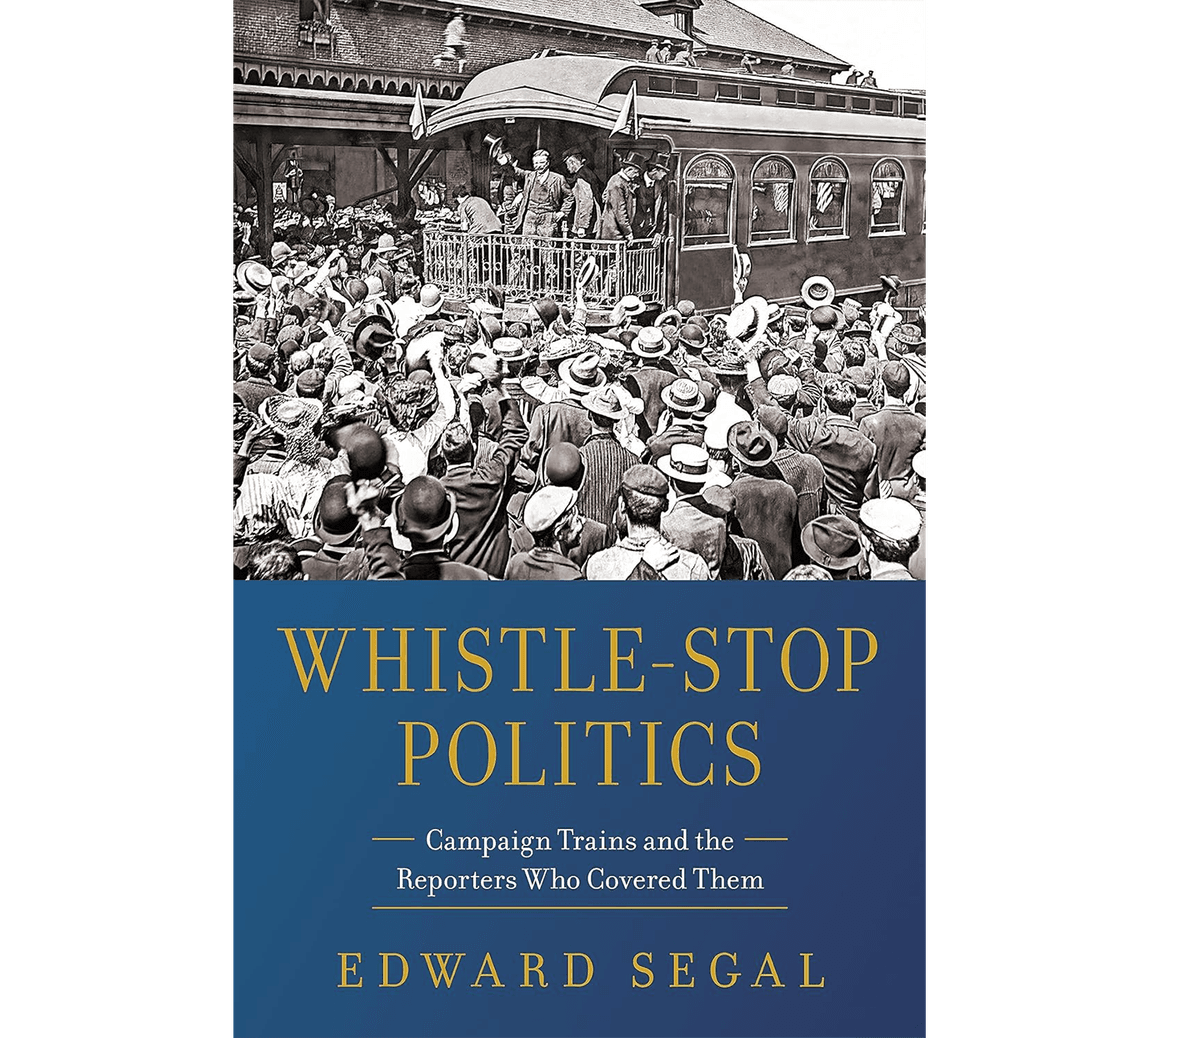 Cover of the 2024 book "Whistle-Stop Politics: Campaign Trains and the Reporters Who Covered Them" by Edward Segal. (Rock Creek Media)